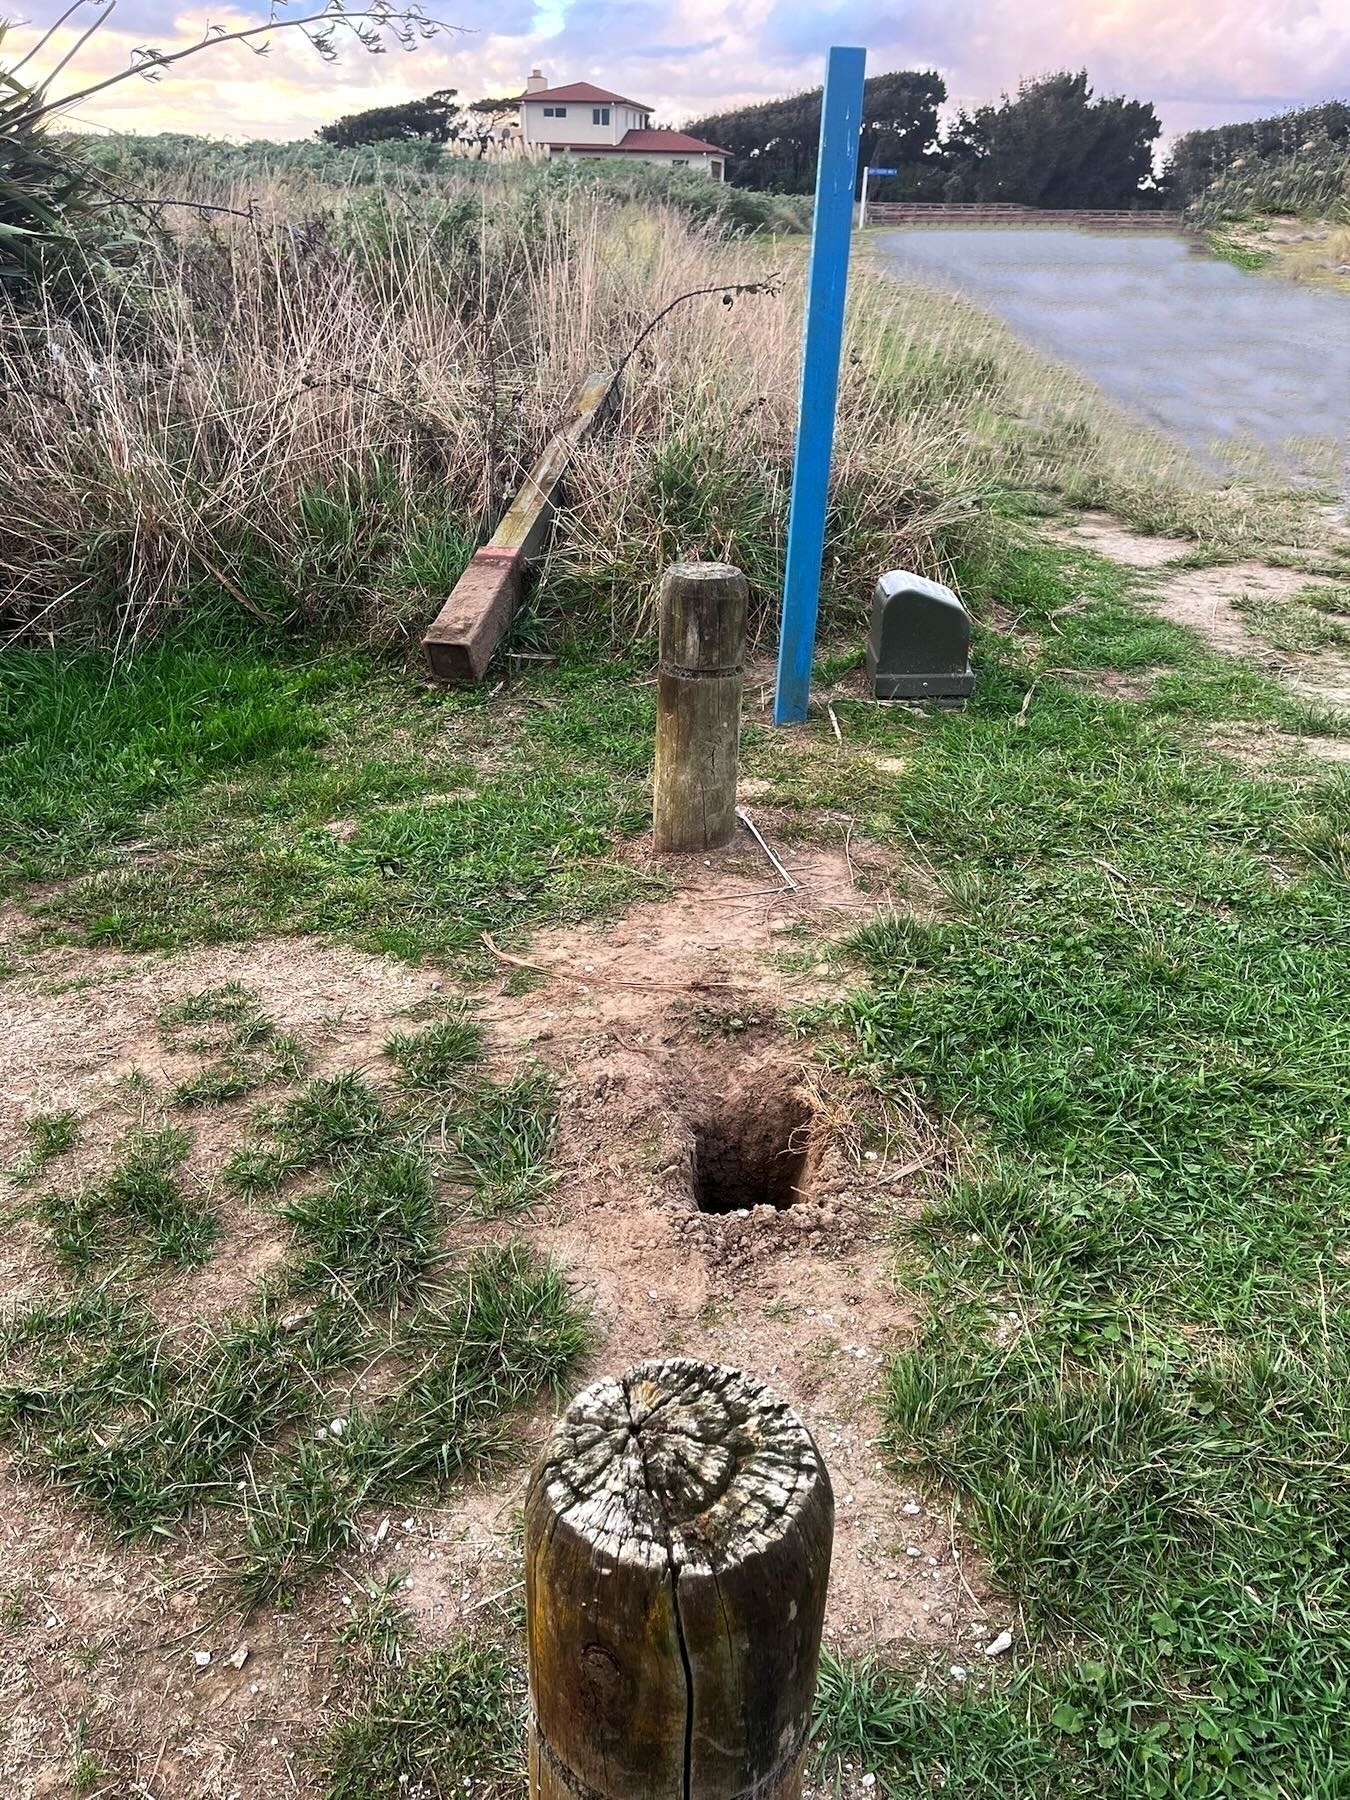 Large marker post has been removed and discarded, and a large hole remains in the ground. 